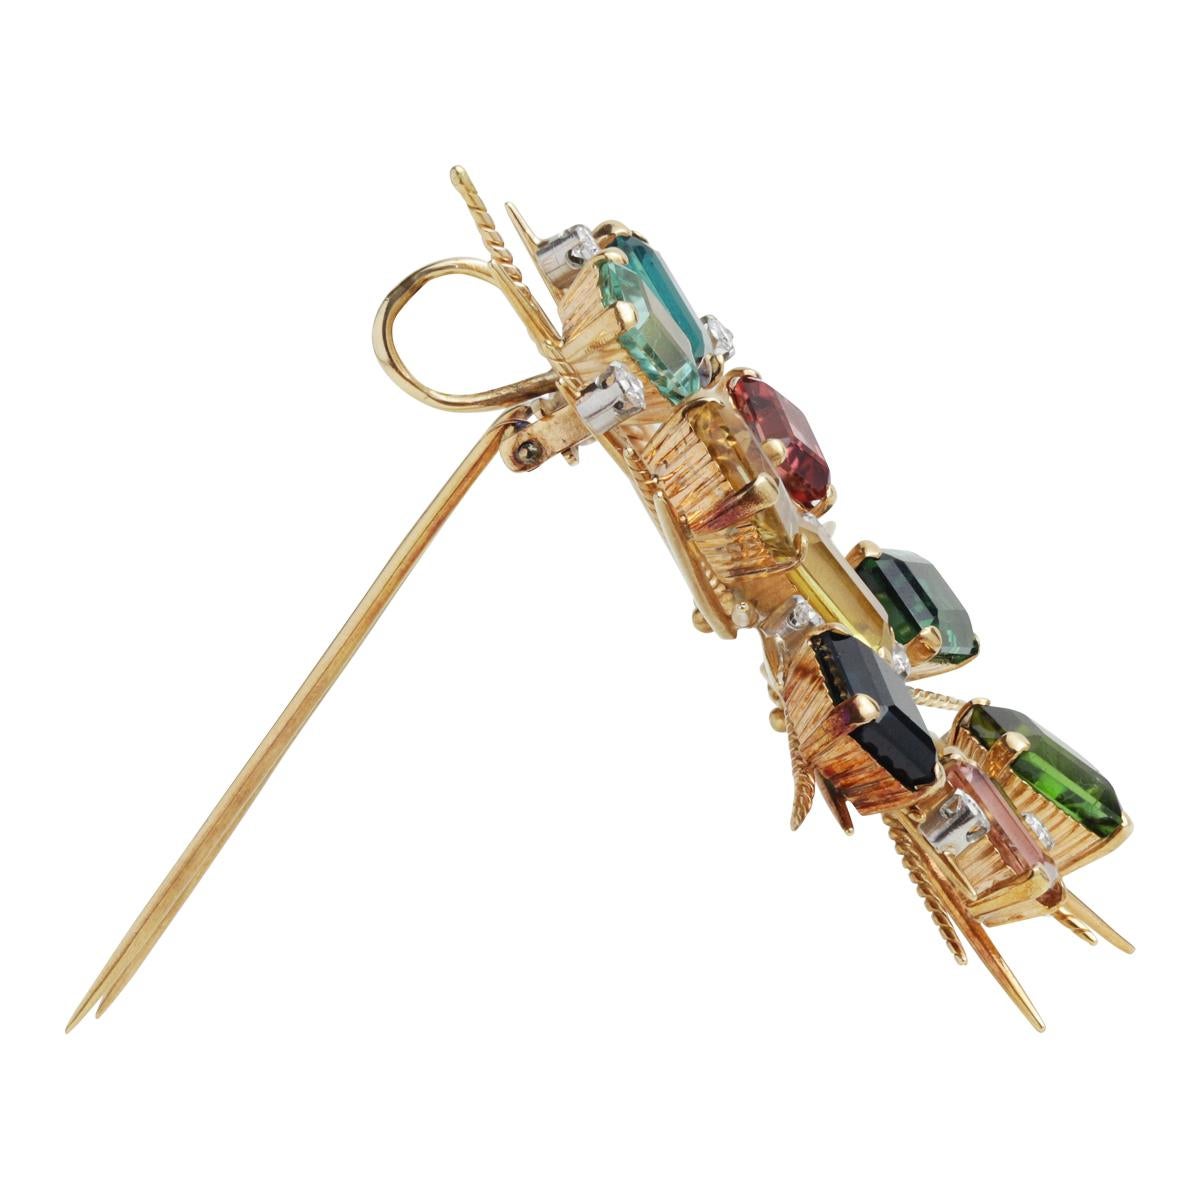 Wow, this is one beautiful brooch or pendant. Who would have thought tourmaline comes in such a wonderful varieties of colours. From deep teal greens, to golden yellows, soft pinks and the palest of blues - this will work back well with any outfit.